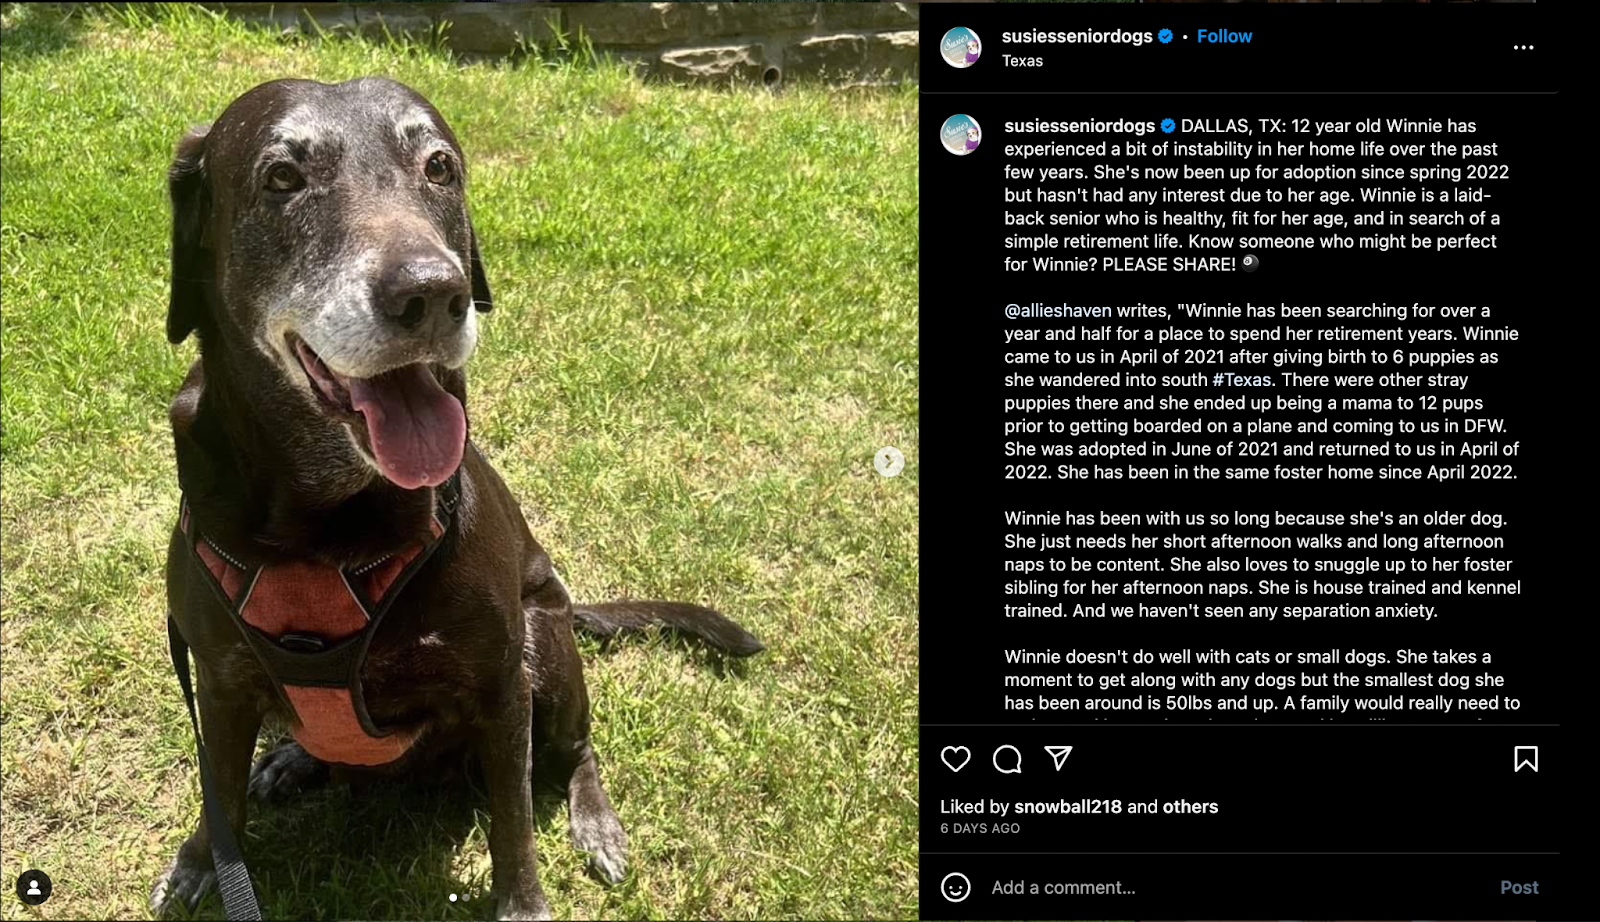 Susie Senior Dogs Insta post featuring a dog